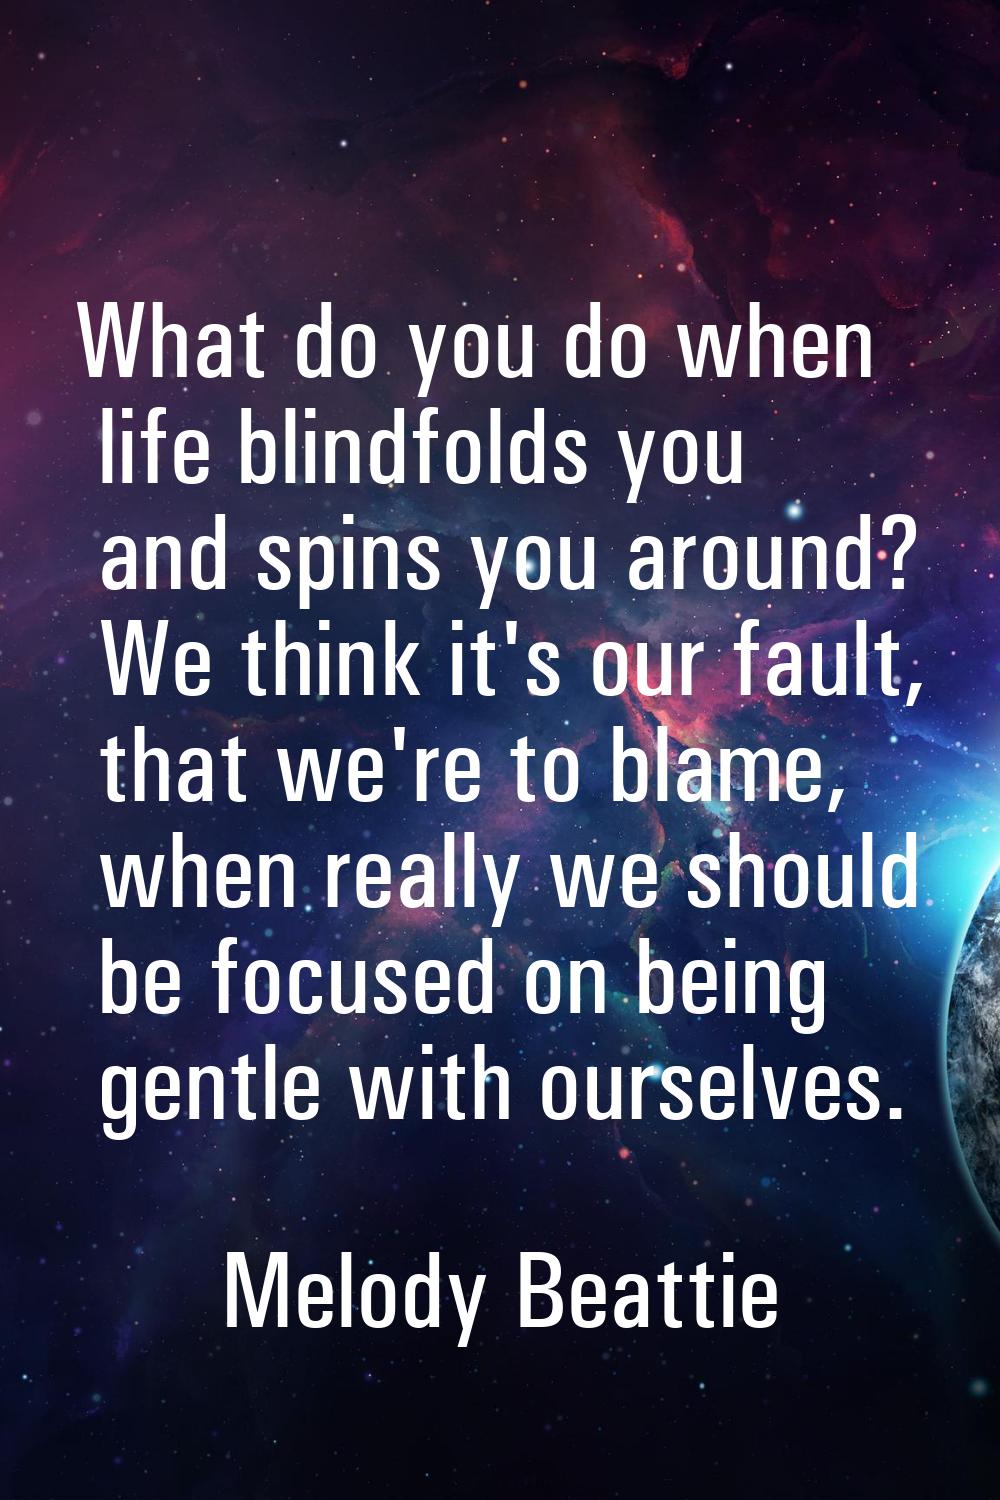 What do you do when life blindfolds you and spins you around? We think it's our fault, that we're t